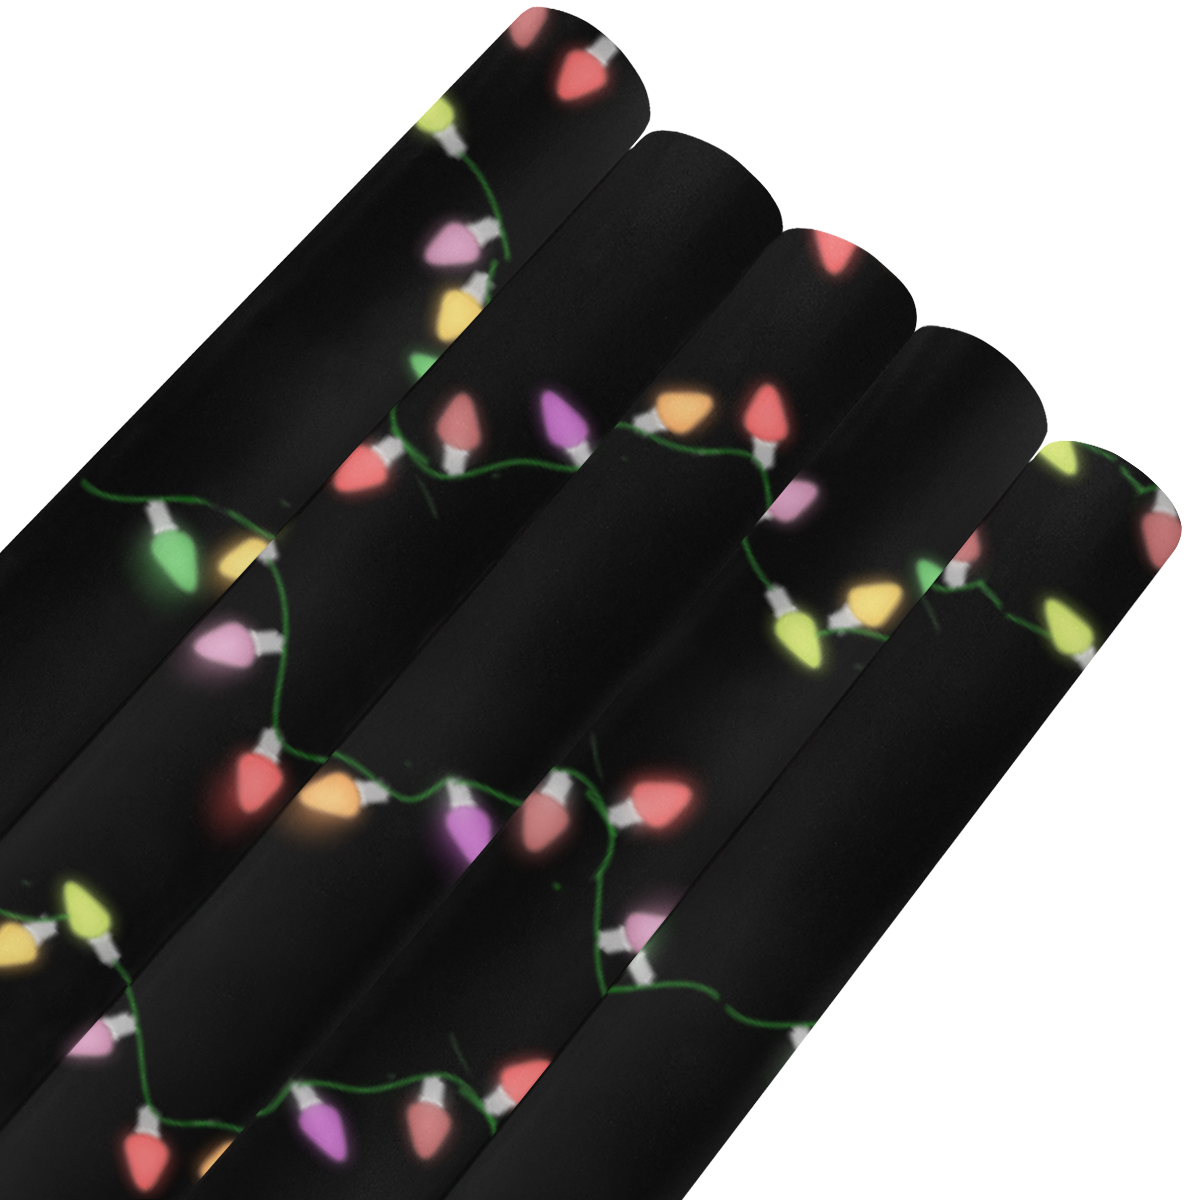 Festive Christmas Lights on Black Gift Wrapping Paper 58"x 23" (5 Rolls)